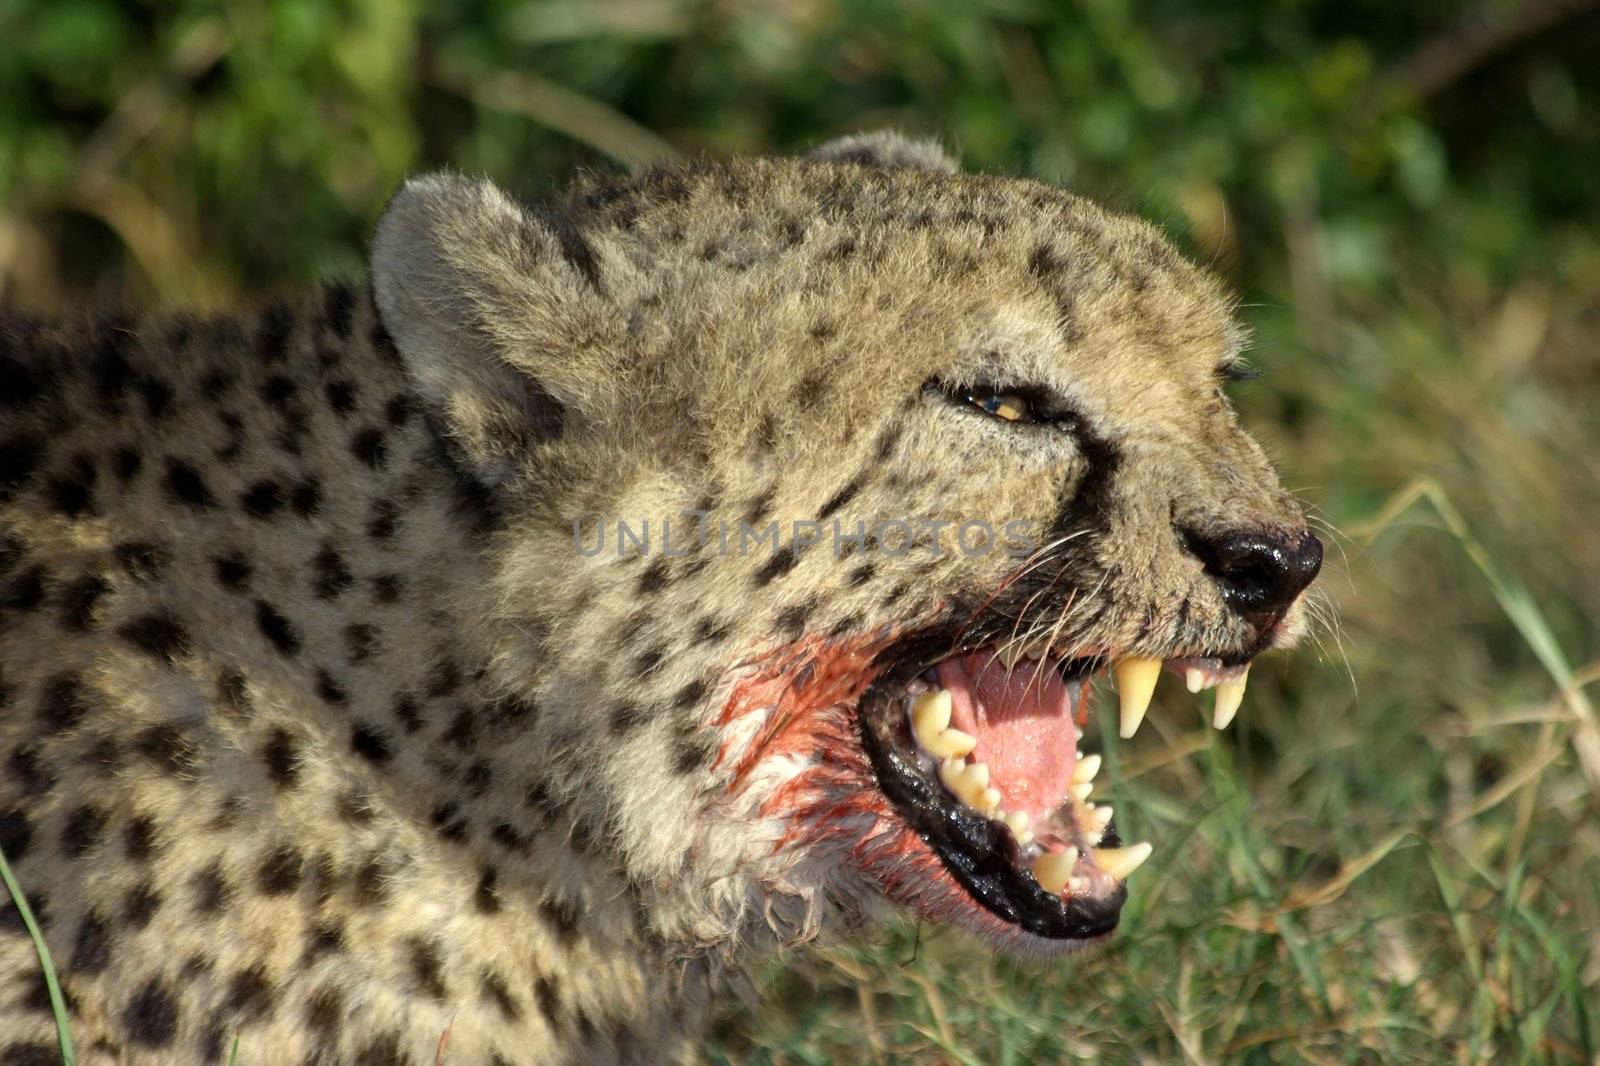 Snarling Cheetah with blood on it's face and showing big teeth